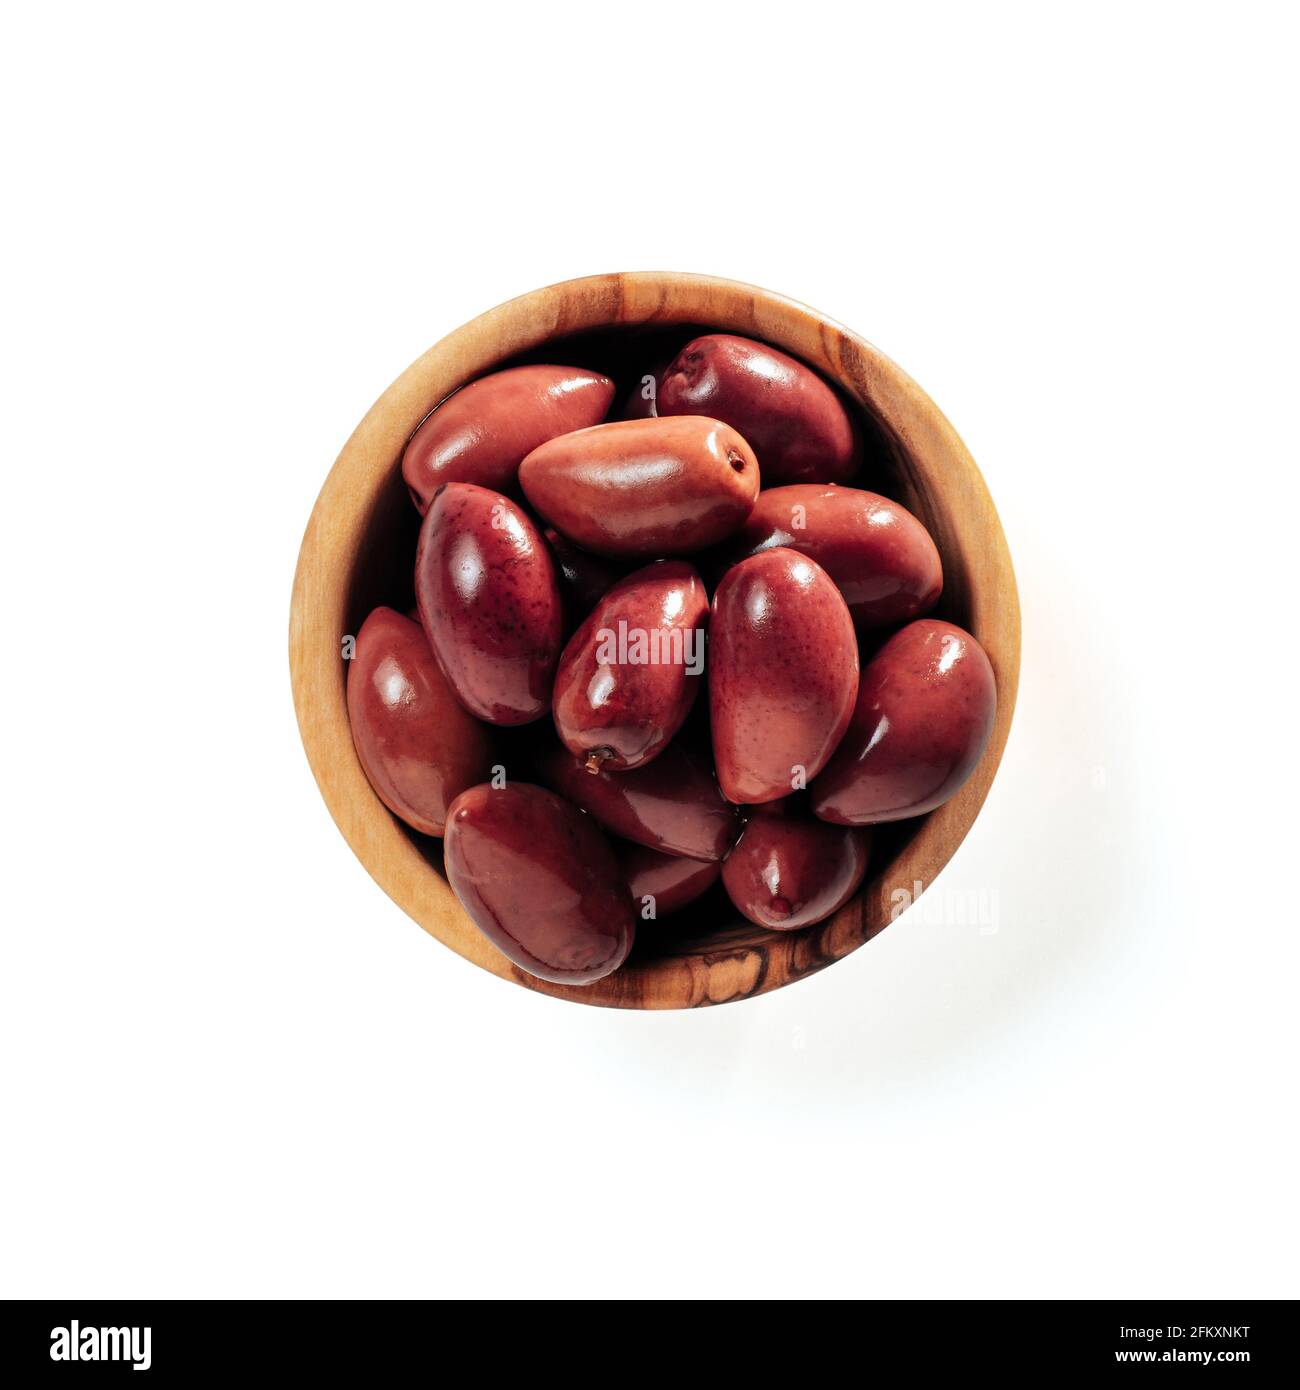 Small wooden bowl with red kalmata olives isolated on white background. Flat lay or top view of small beautiful olive tree bowl with full red olives, isolated with clipping path Stock Photo